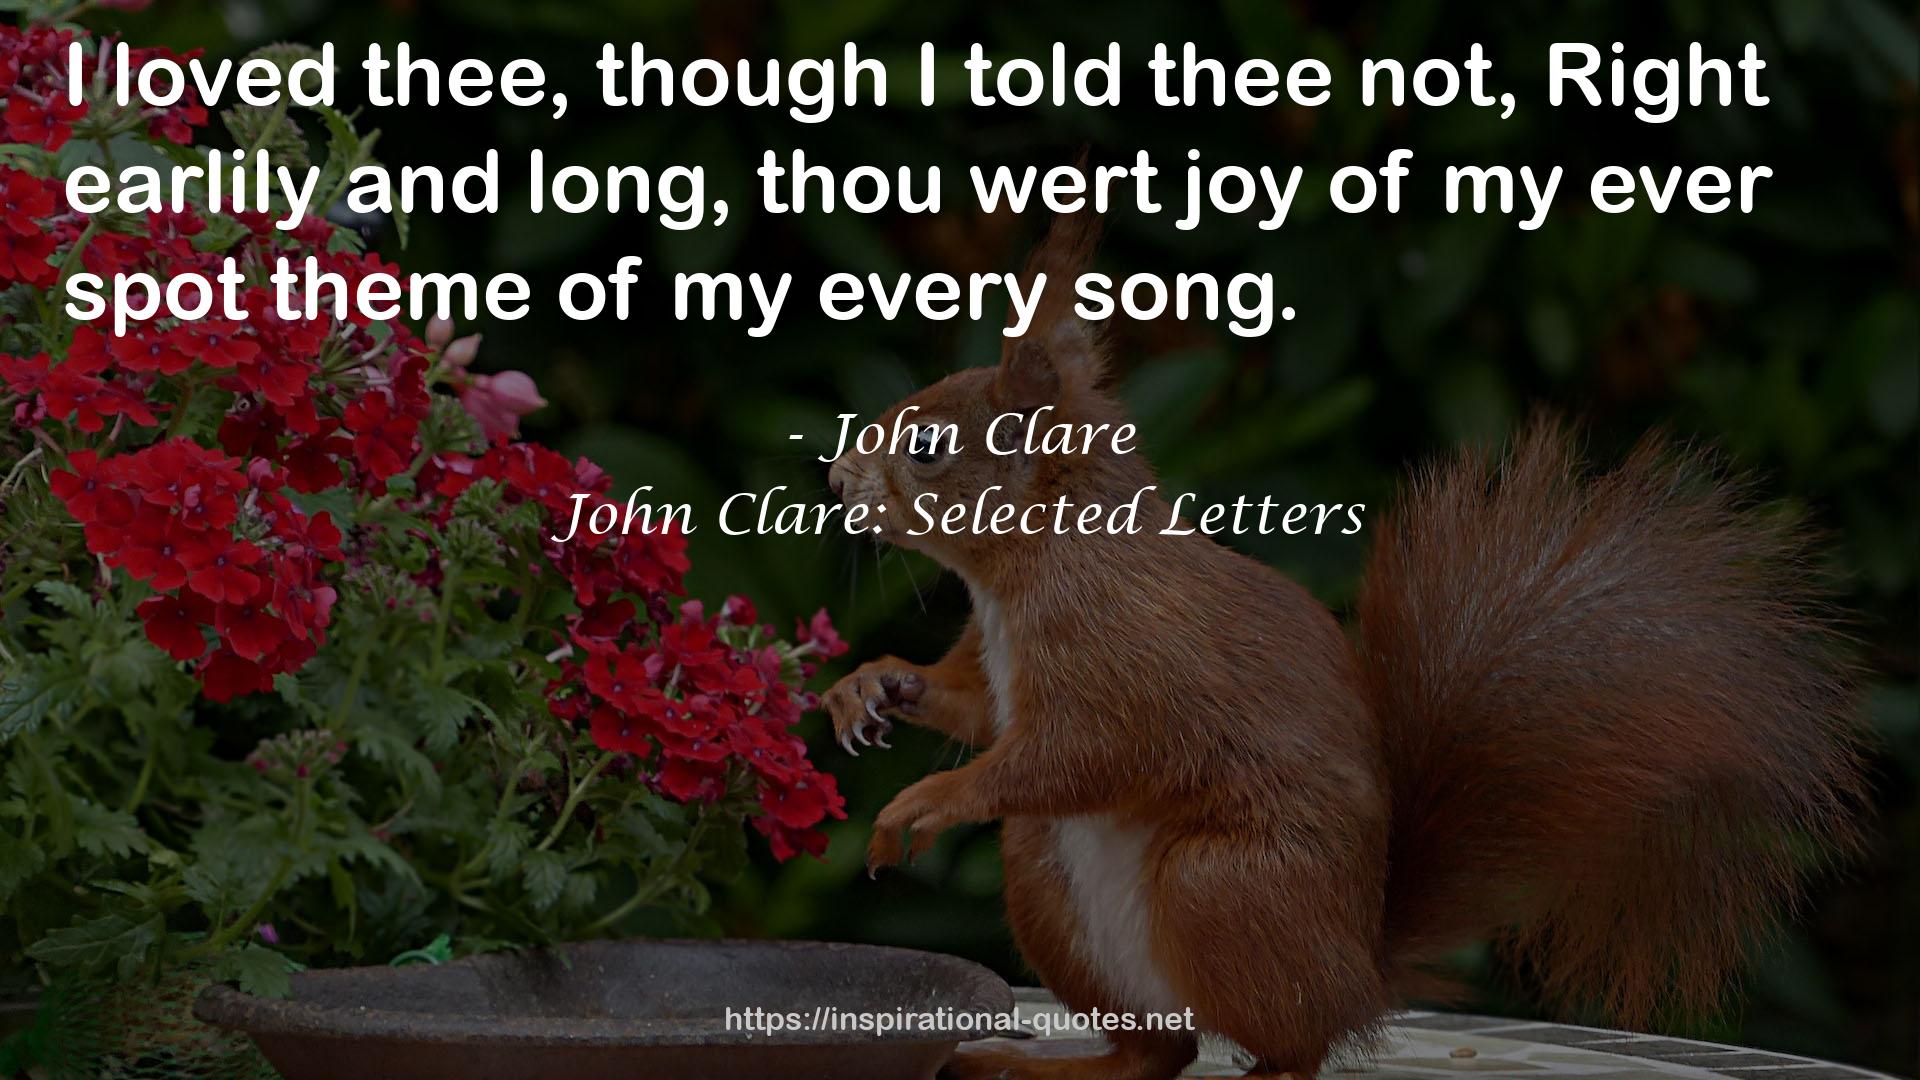 John Clare: Selected Letters QUOTES